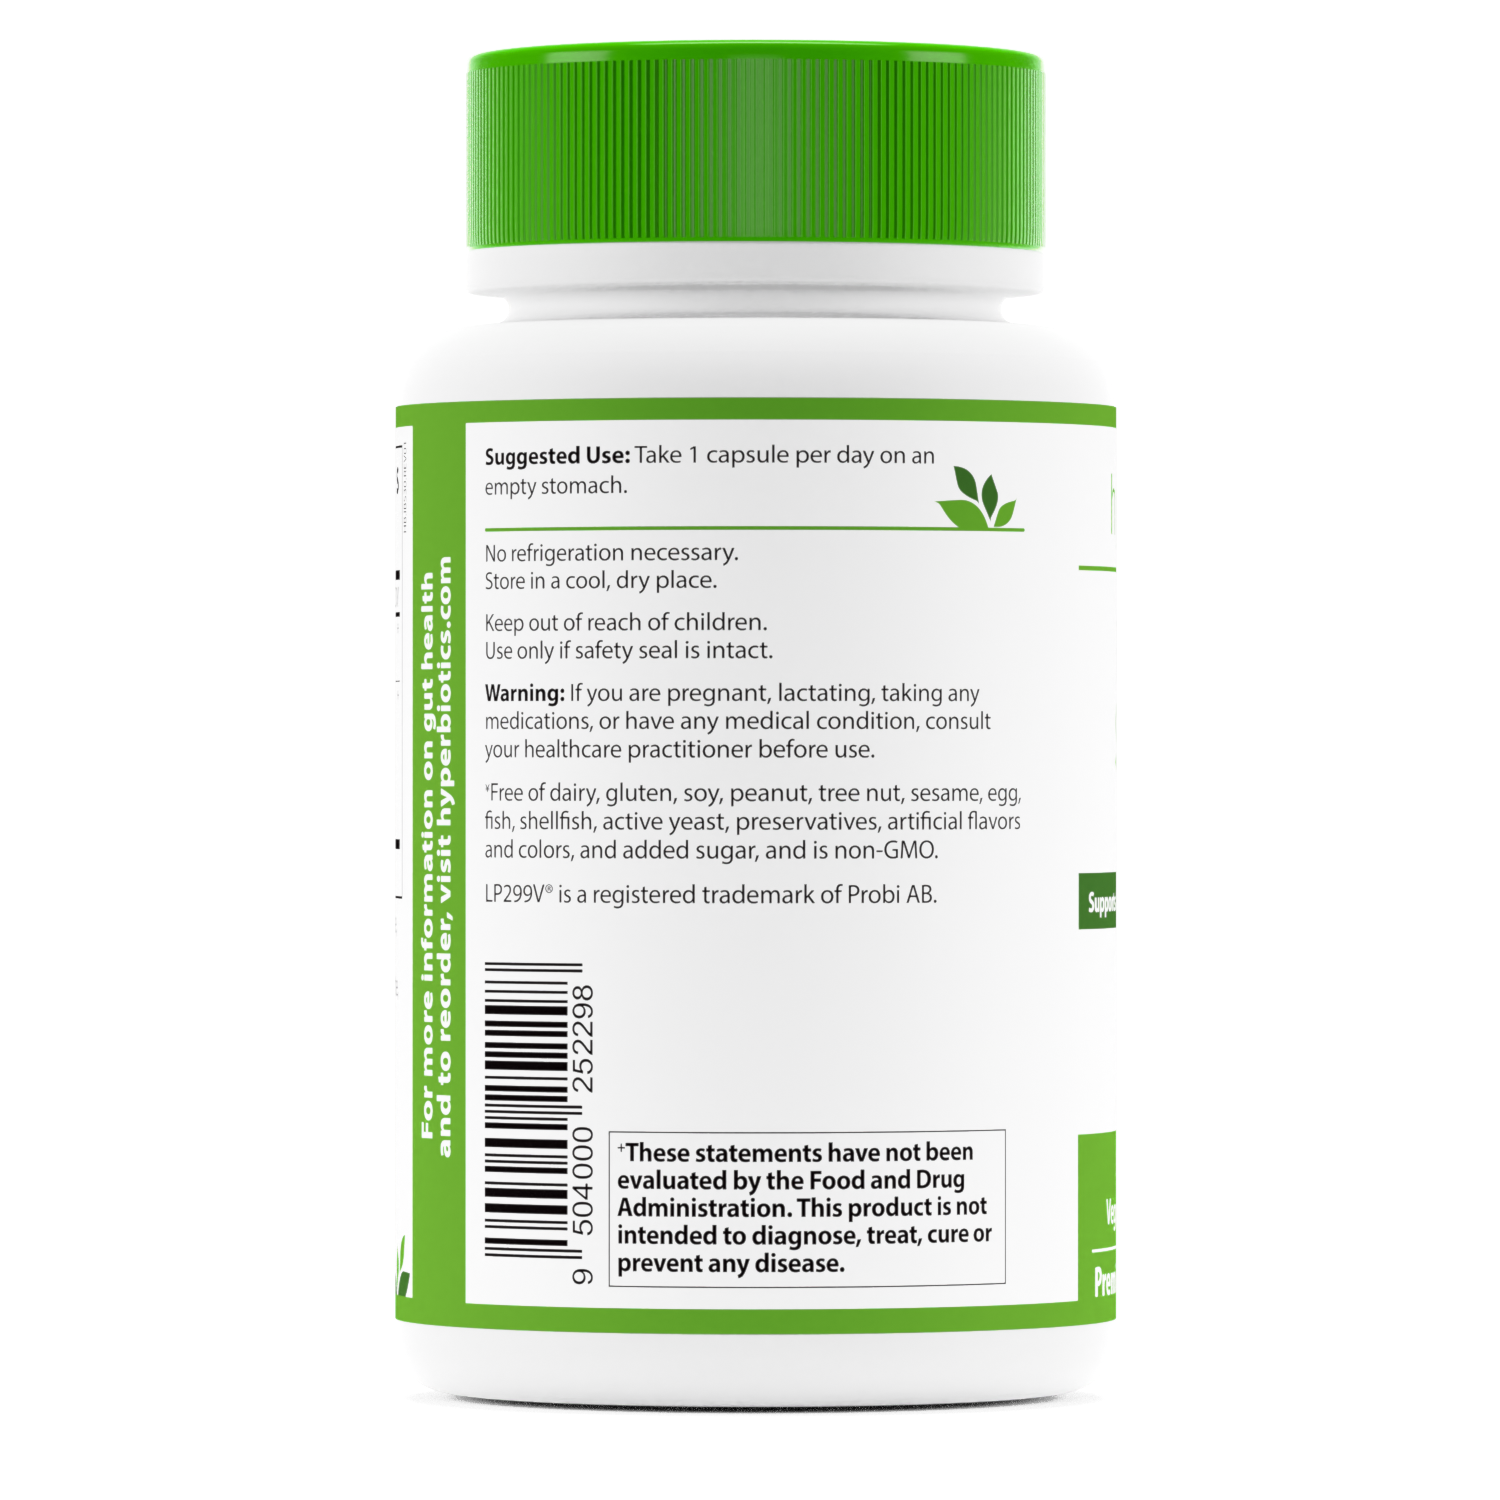 Hyperbiotics PRO-IBS Support suggested use panel of bottle.